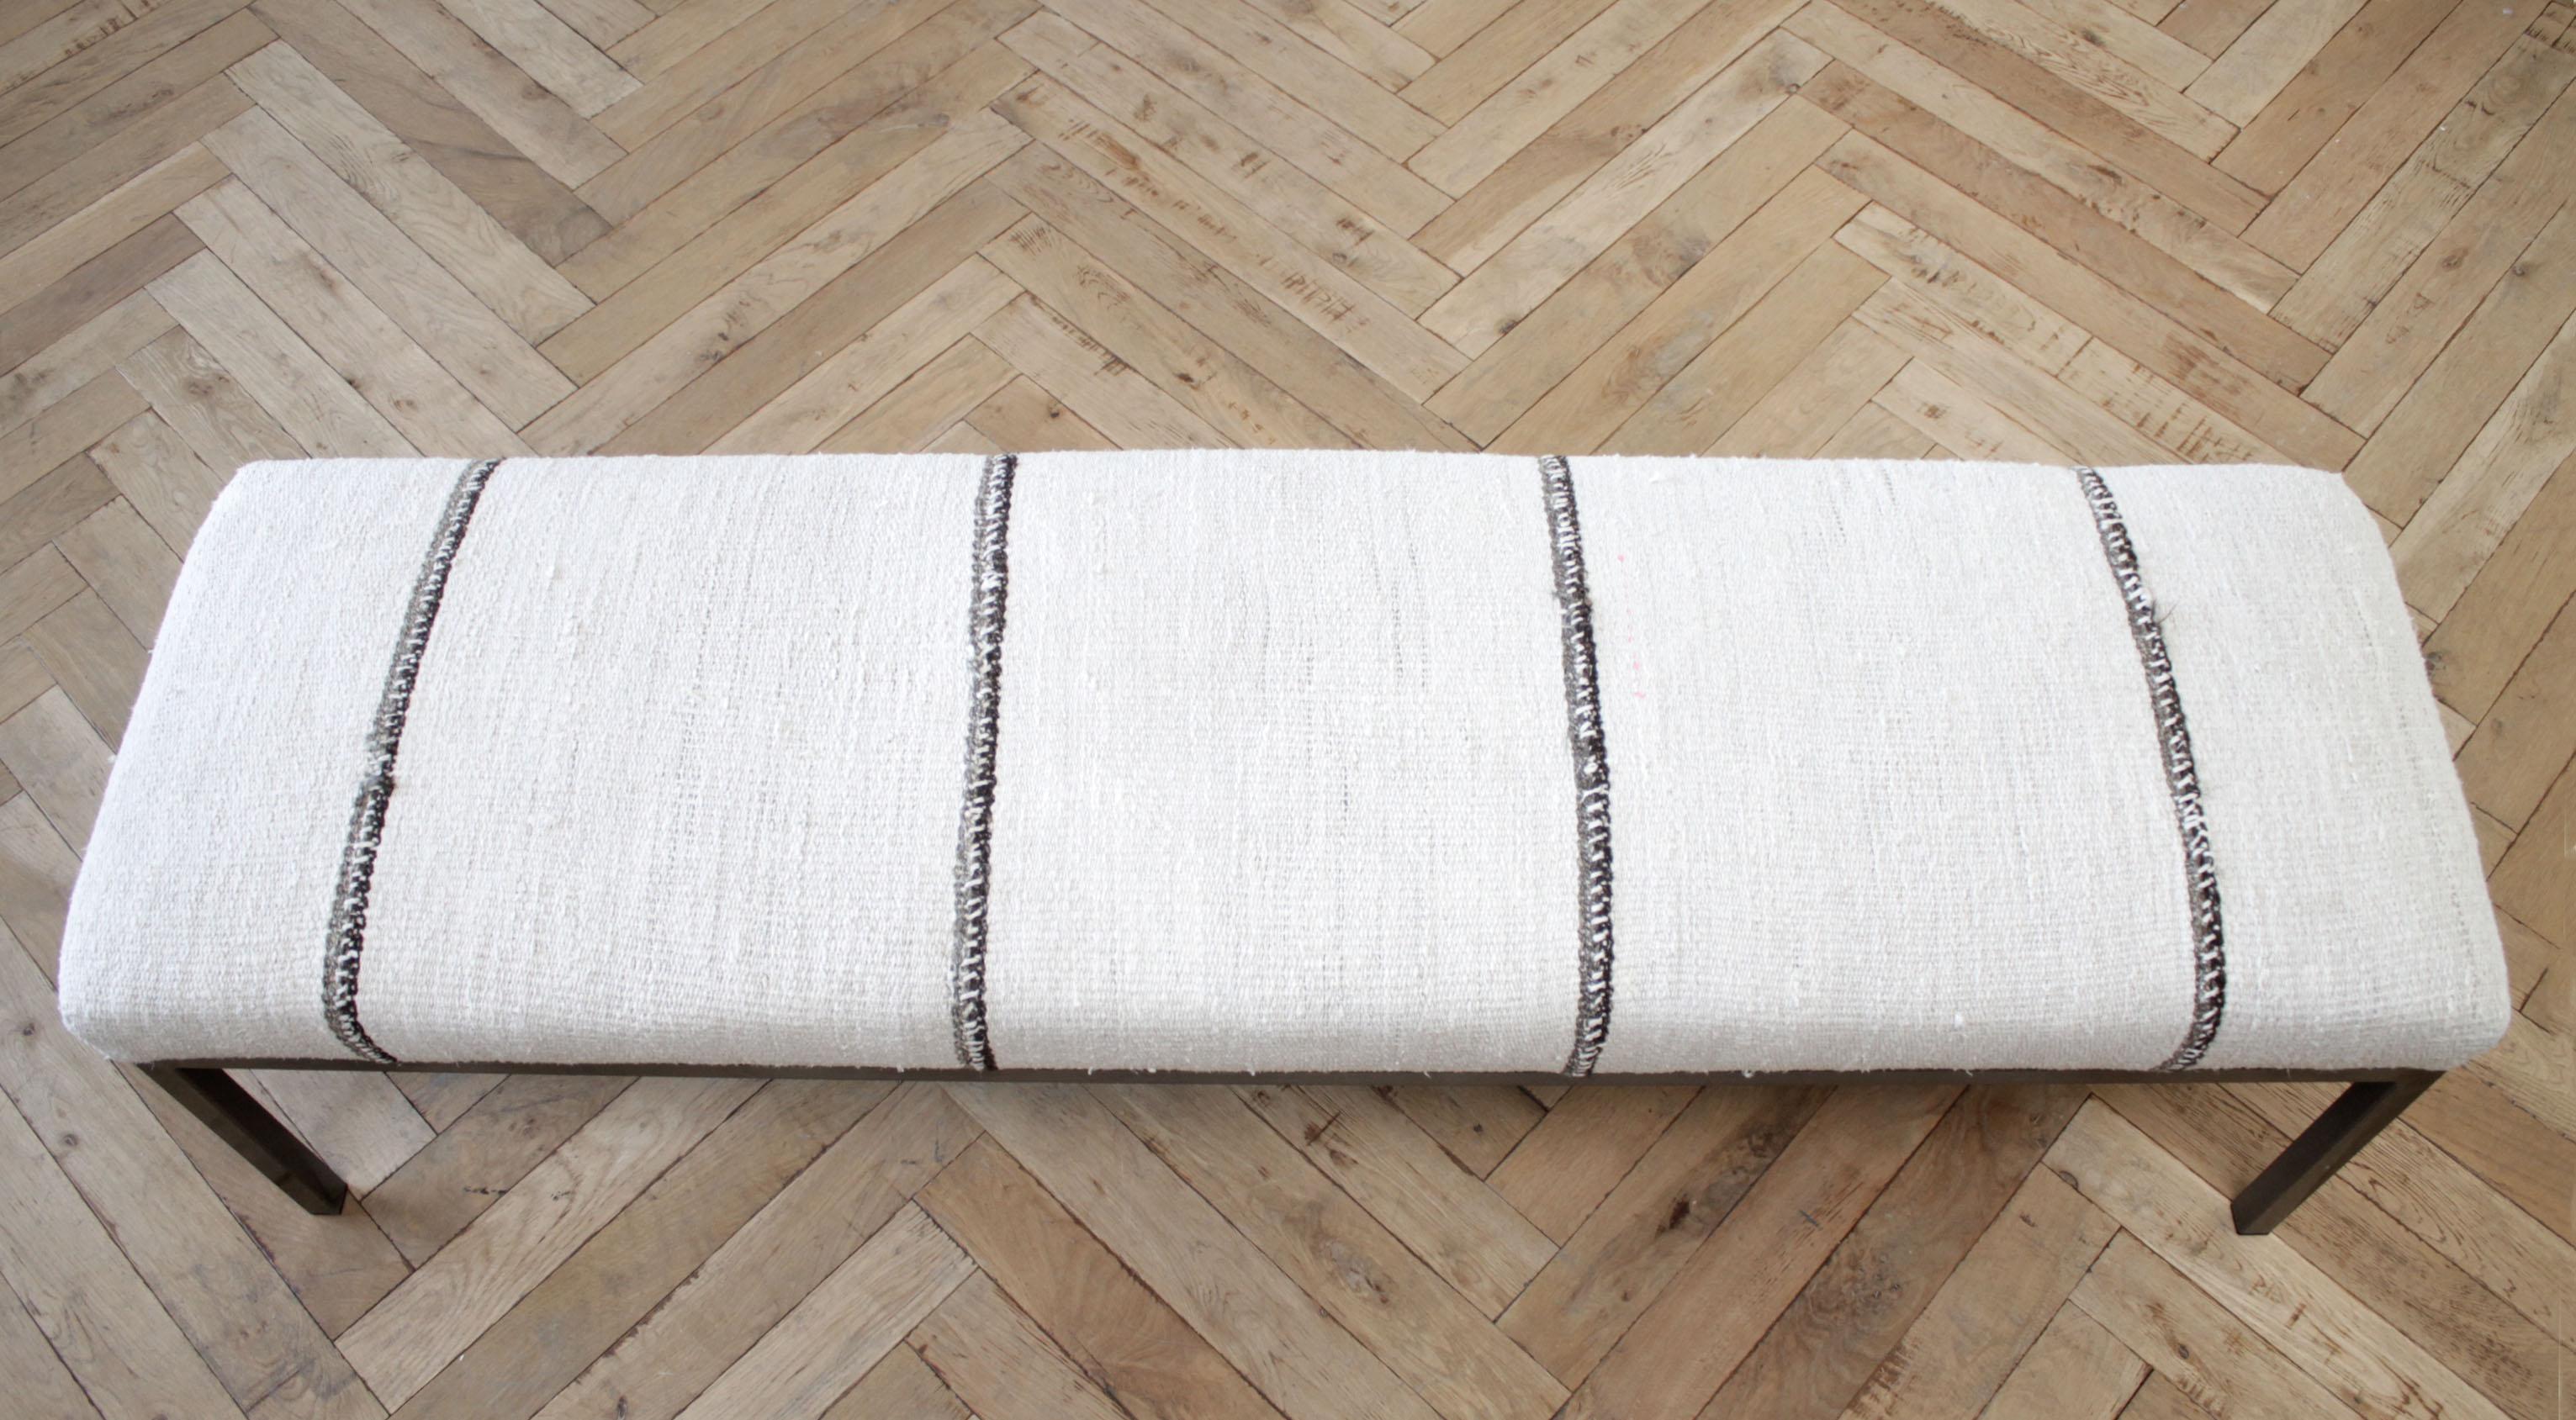 North American Custom Made Iron Bench Upholstered in an Vintage Turkish Hemp Rug